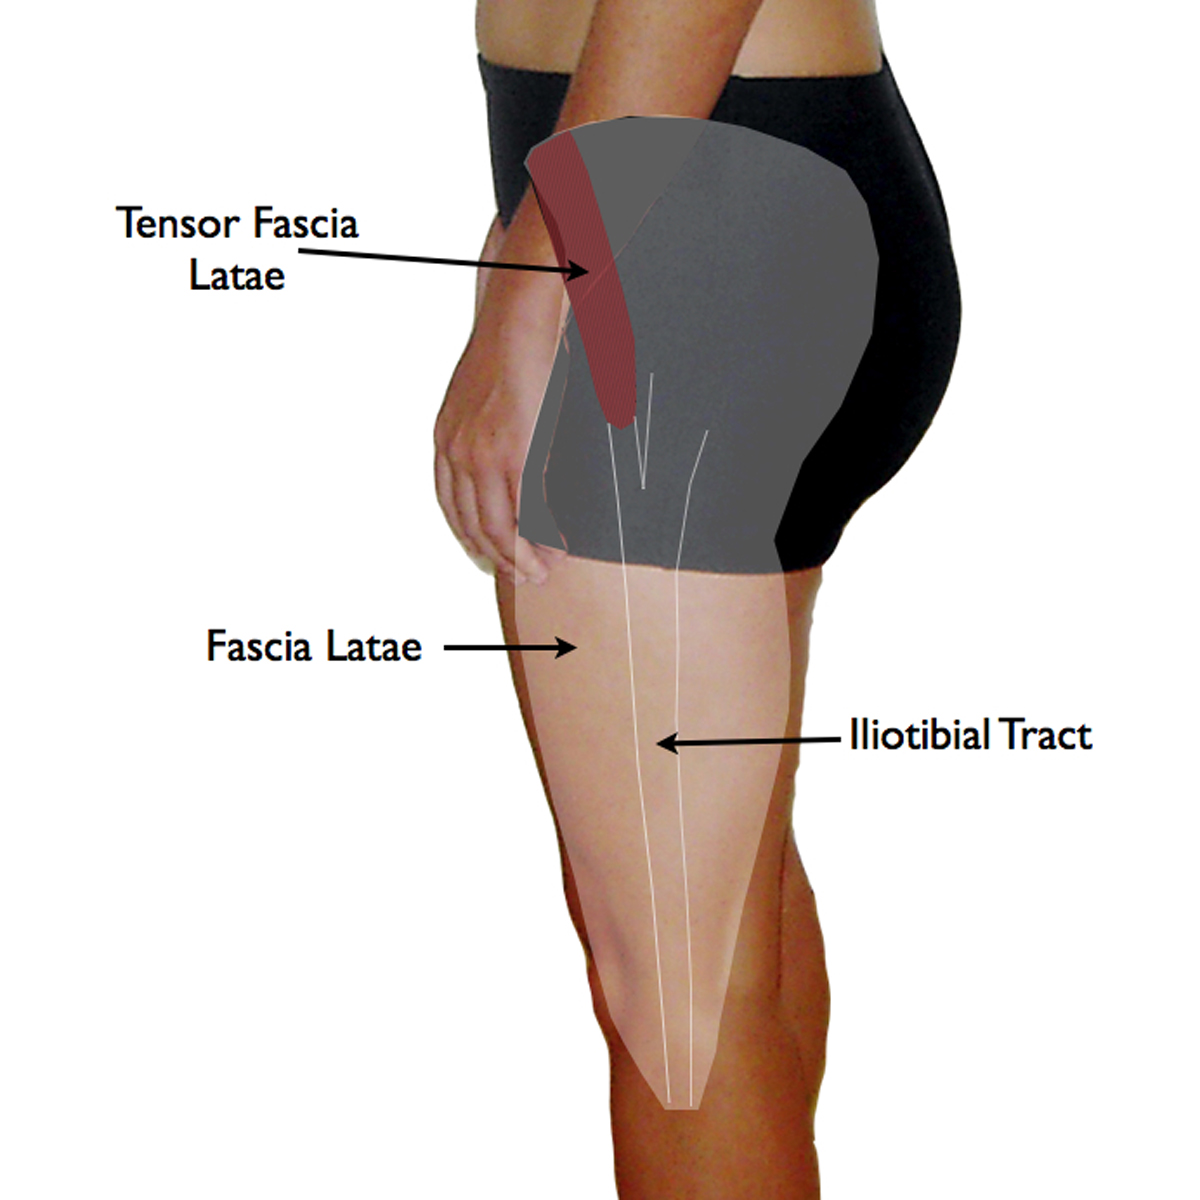 Tensor Fascia Lata Trigger Point in IT Band and Hip Pain Complaints | TriggerPointTherapist.com